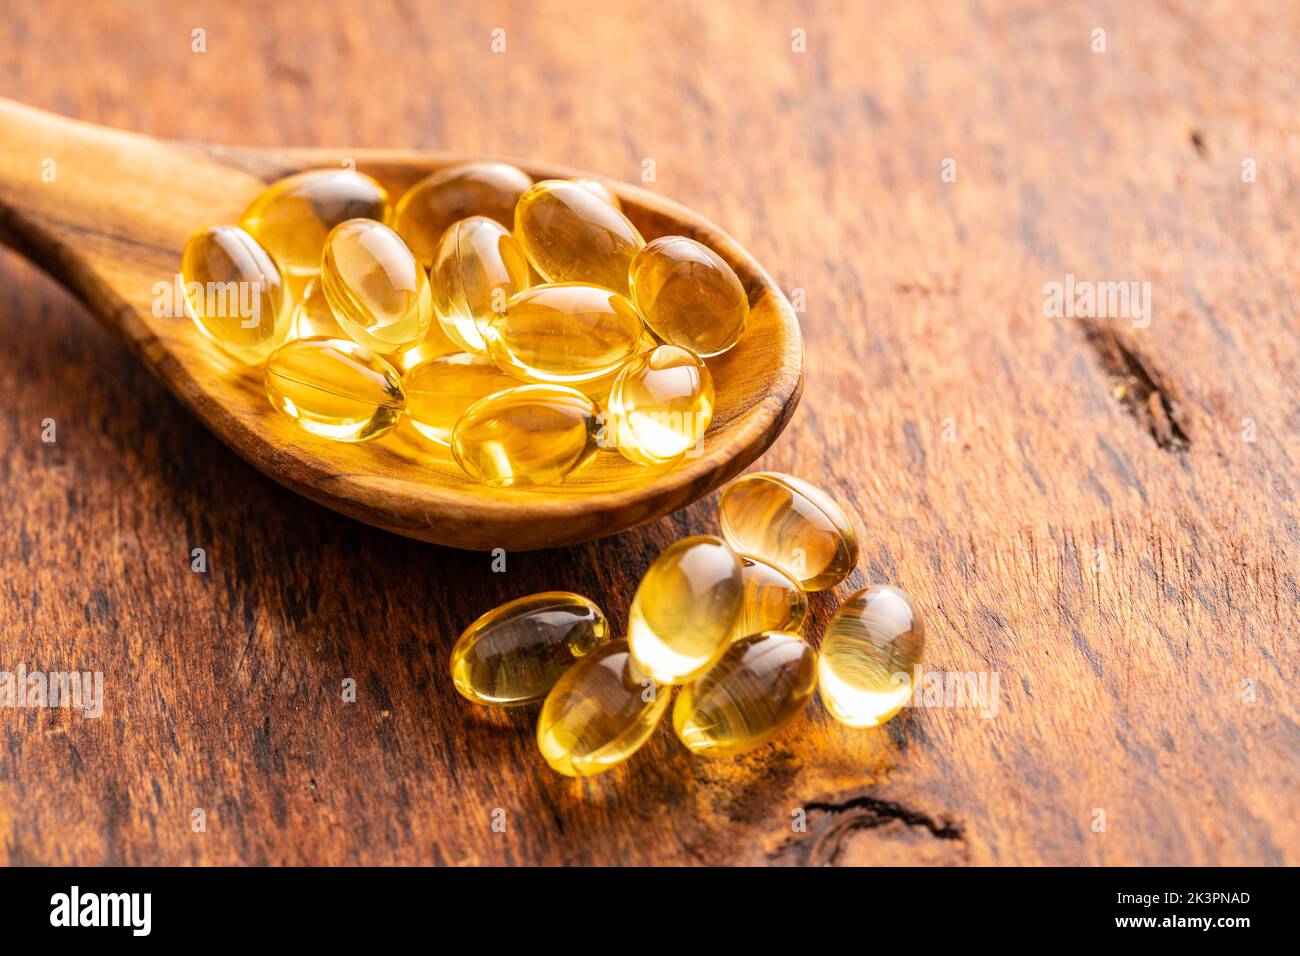 Fish oil capsules. Yellow omega 3 pills in spoon on the wooden table. Stock Photo